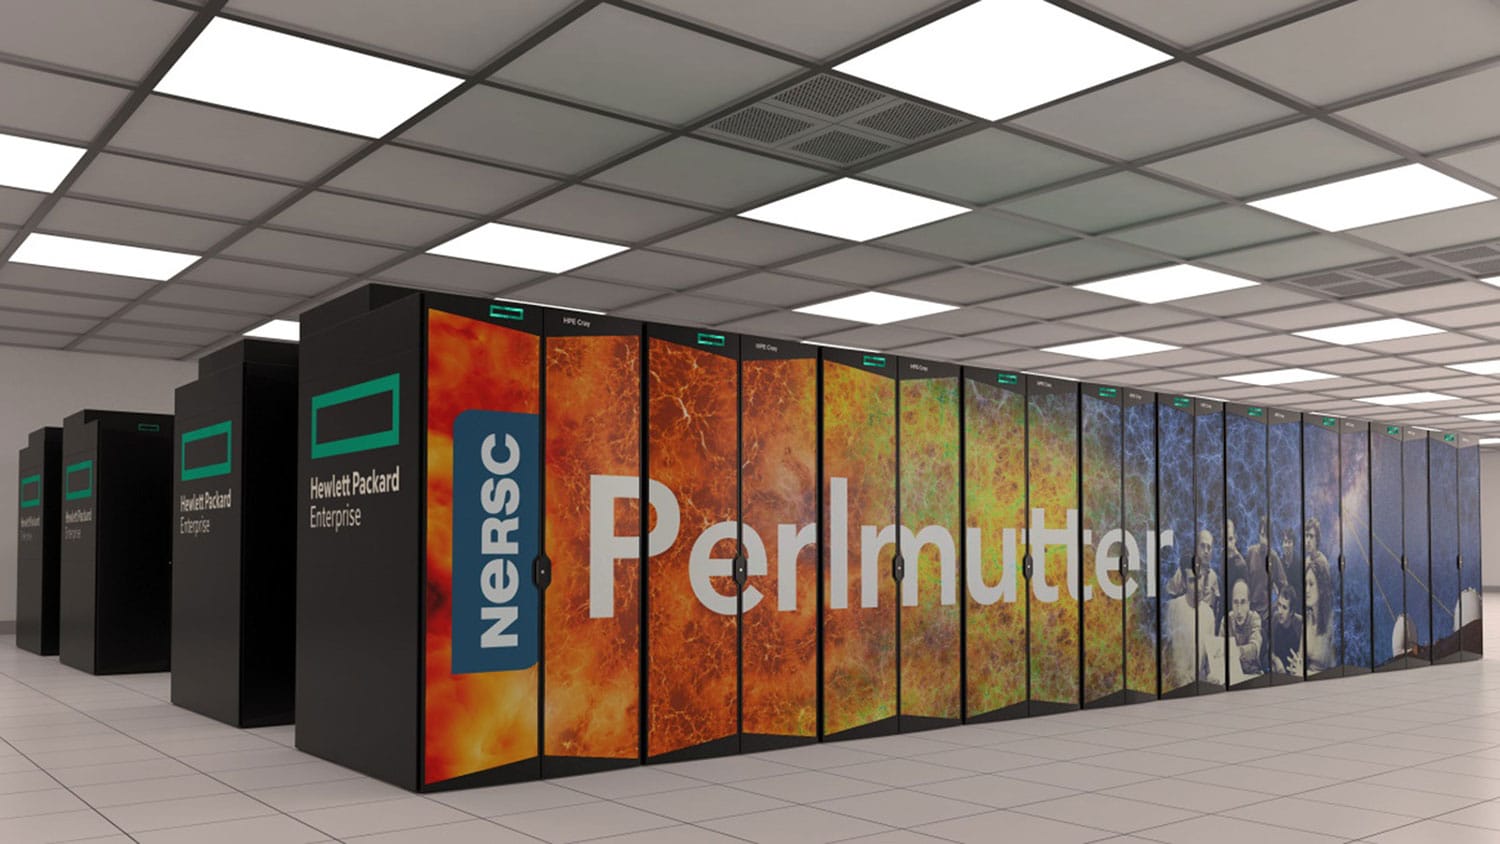 AI Supercomputer Perlmutter will help create the largest 3D map of the universe